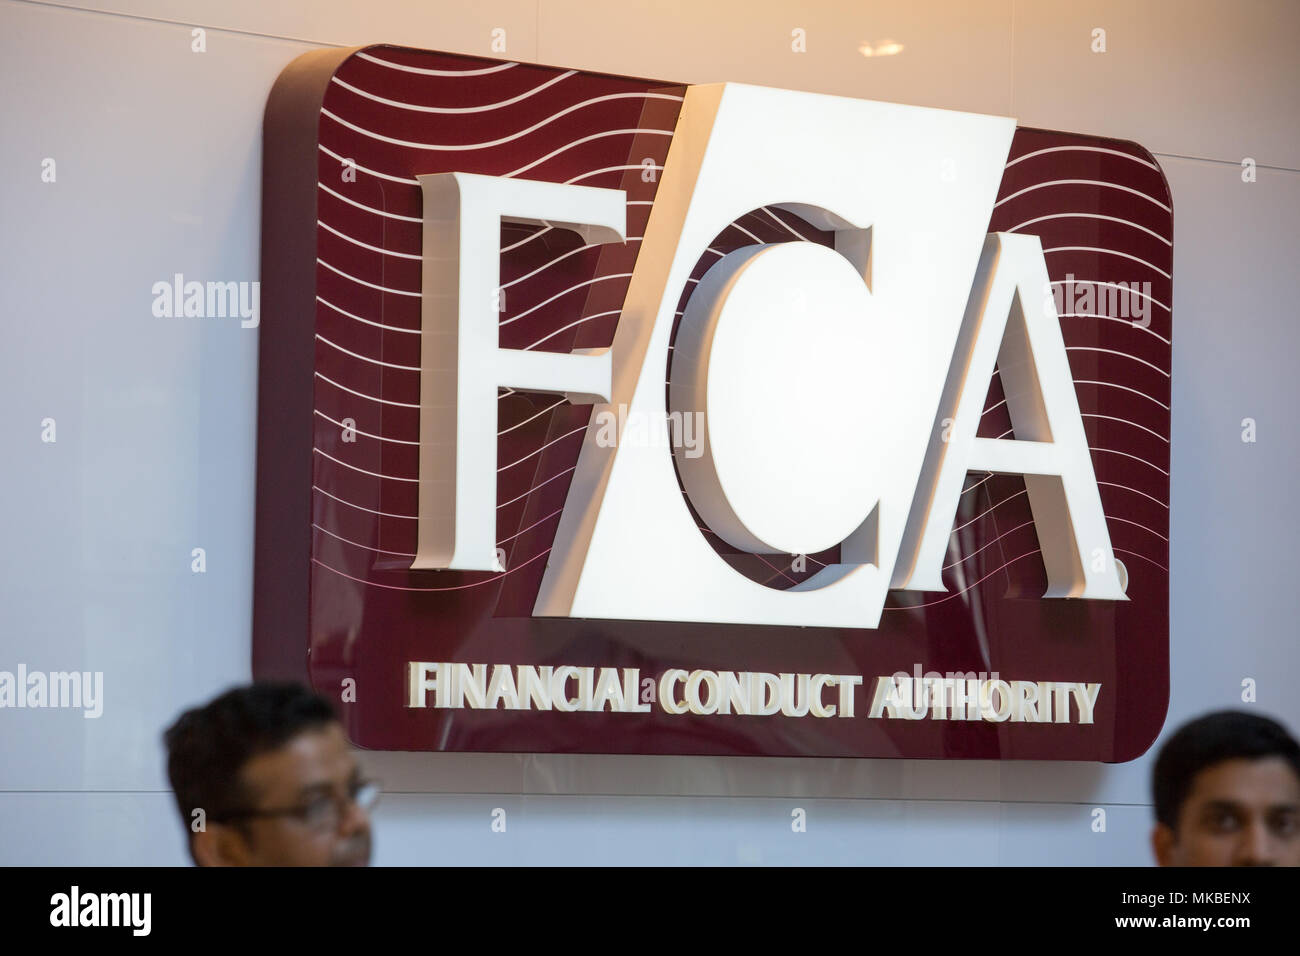 Financial Conduct Authority (FCA) offices, North Colonnade, Docklands, London. Employees exiting through security gates at lunchtime. Stock Photo